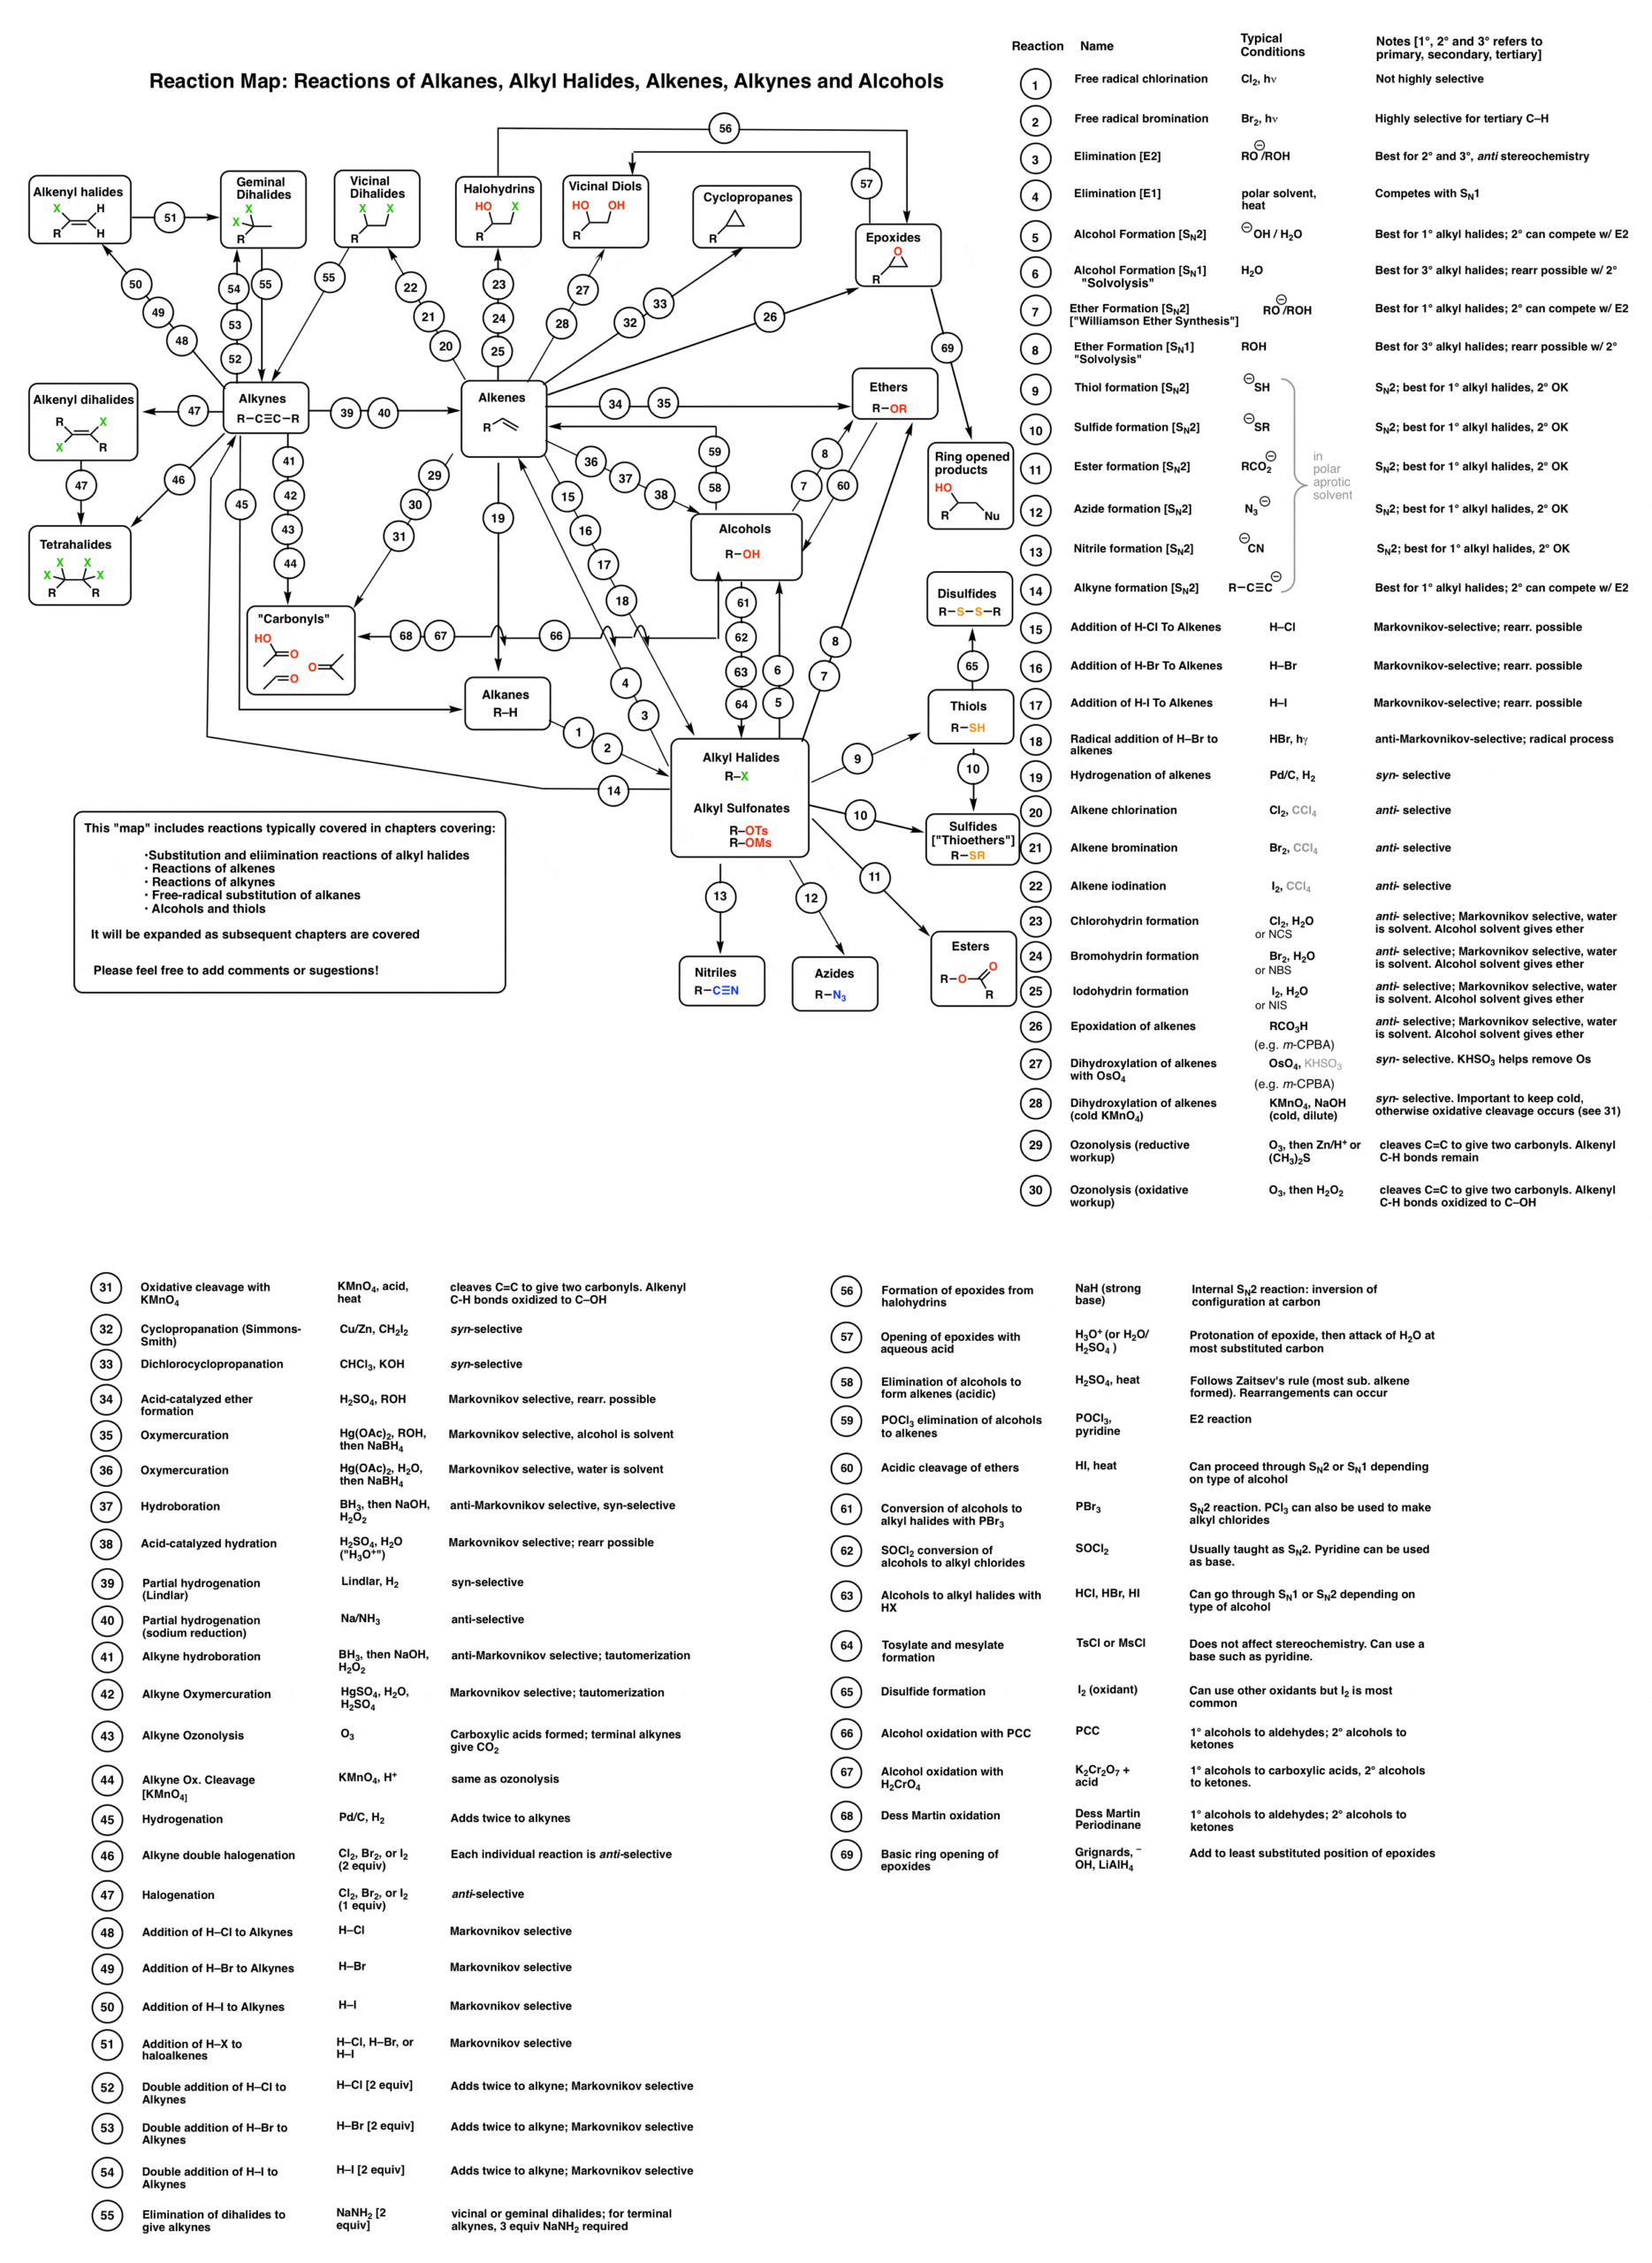 reaction-map-of-alcohols-comprehensive-about-70-reactions-alcohols-ethers-alkenes-alkynes-various-other-reactions-how-they-all-fit-together-guide-for-synthesis-1-scaled